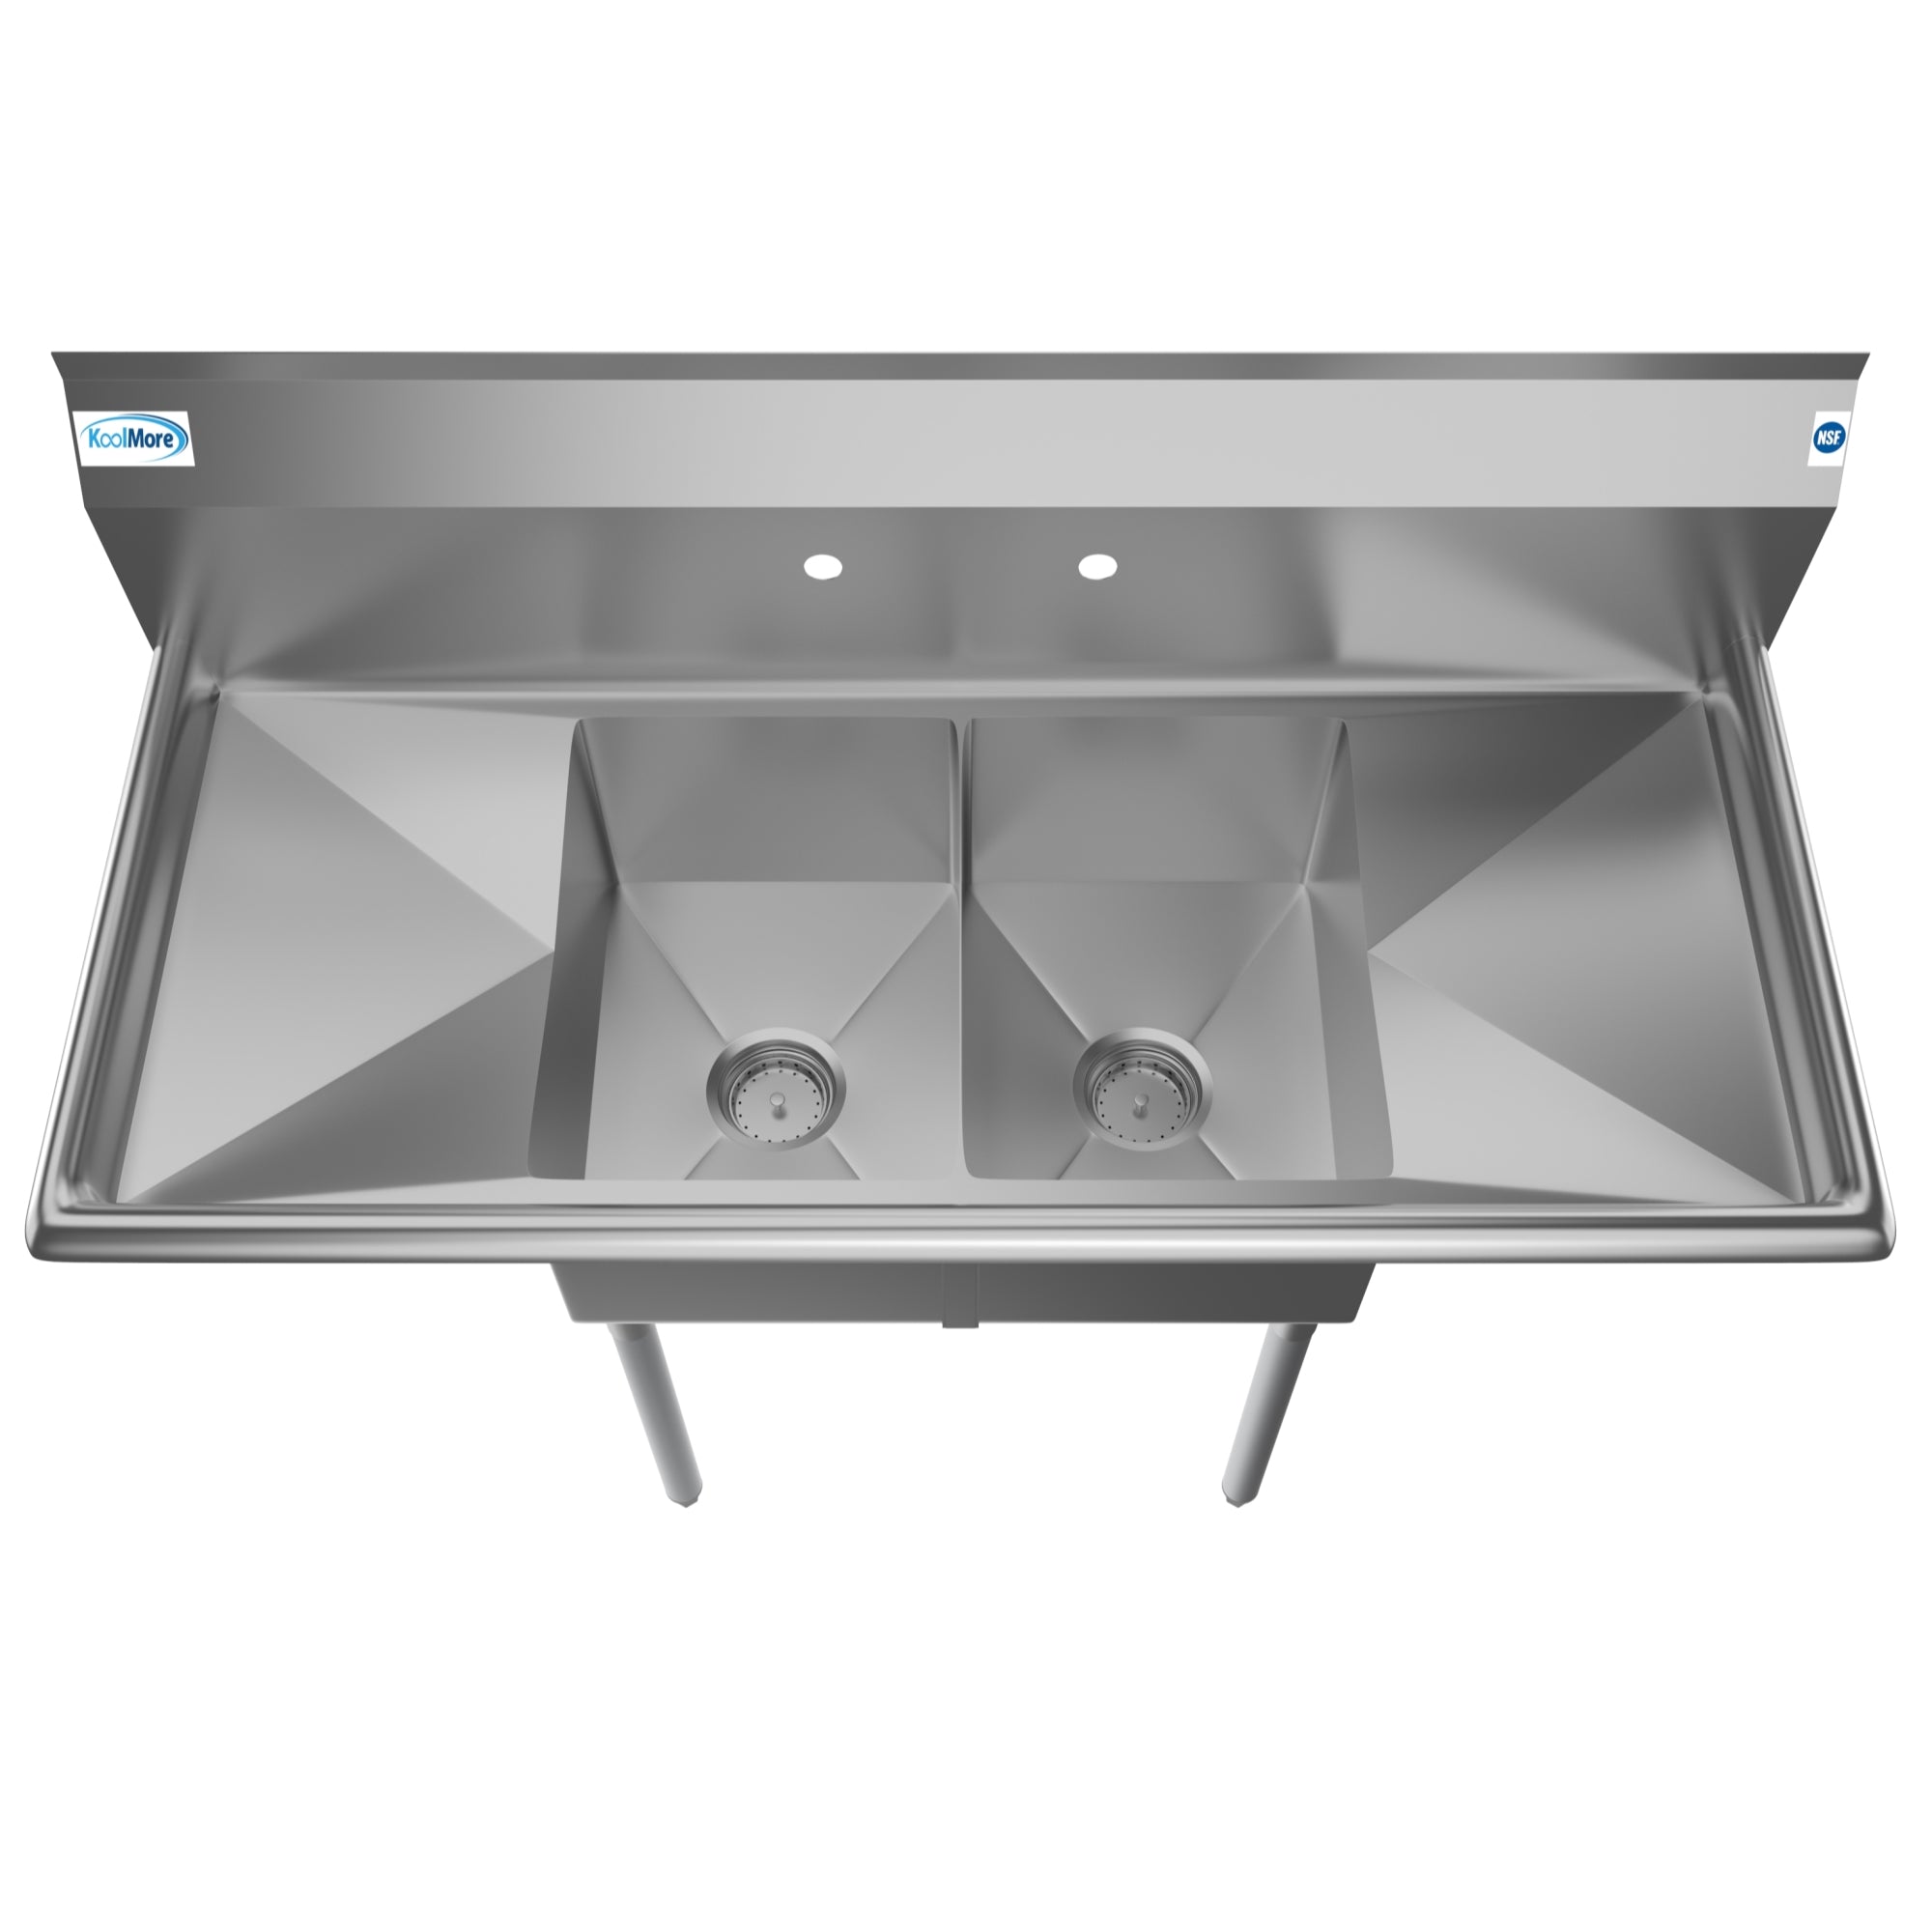 48 in. Two Compartment Stainless Steel Commercial Sink with 2 Drainboards, Bowl Size 12